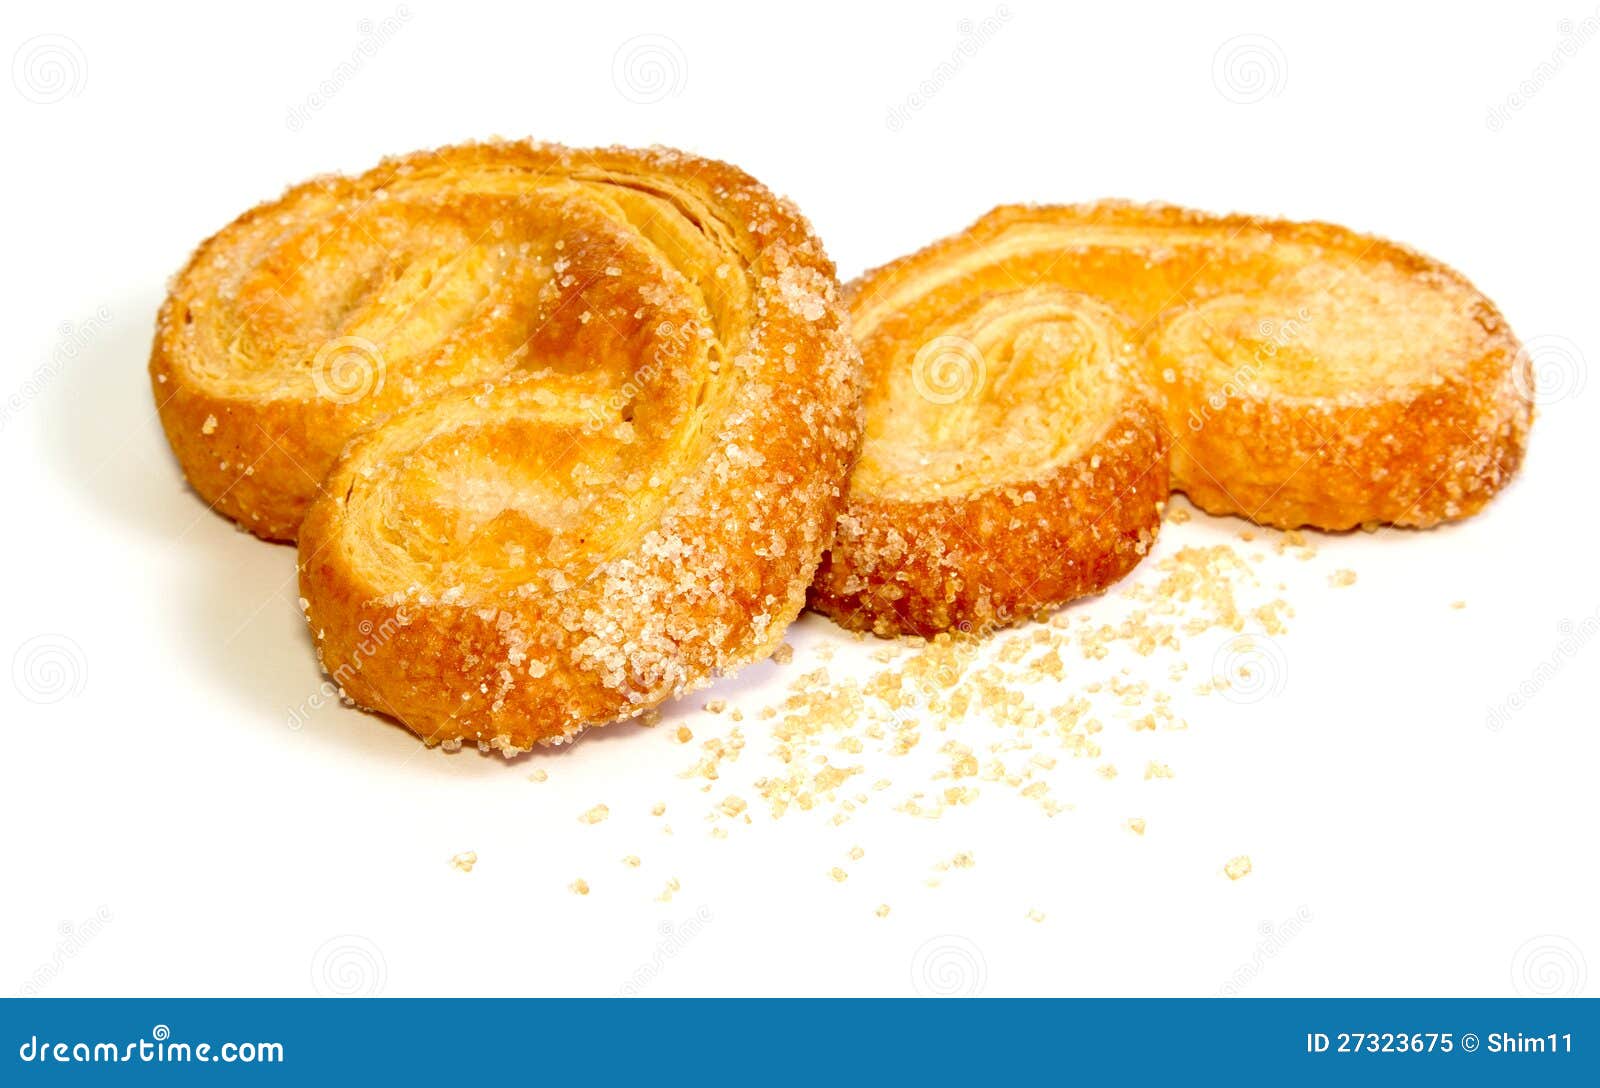 palmera (palmier) sweet puff pastry